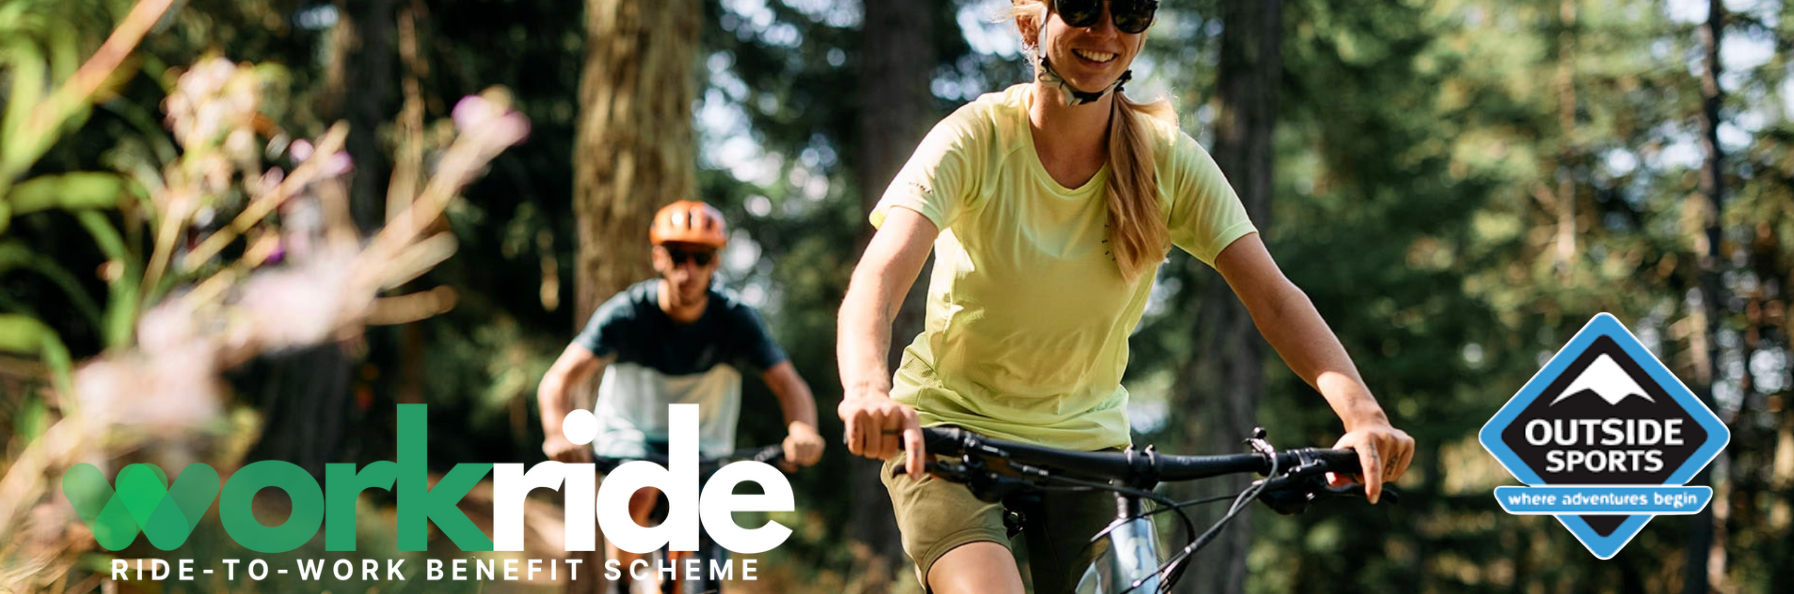 How your staff can save up to 63% on a new bike with WorkRide